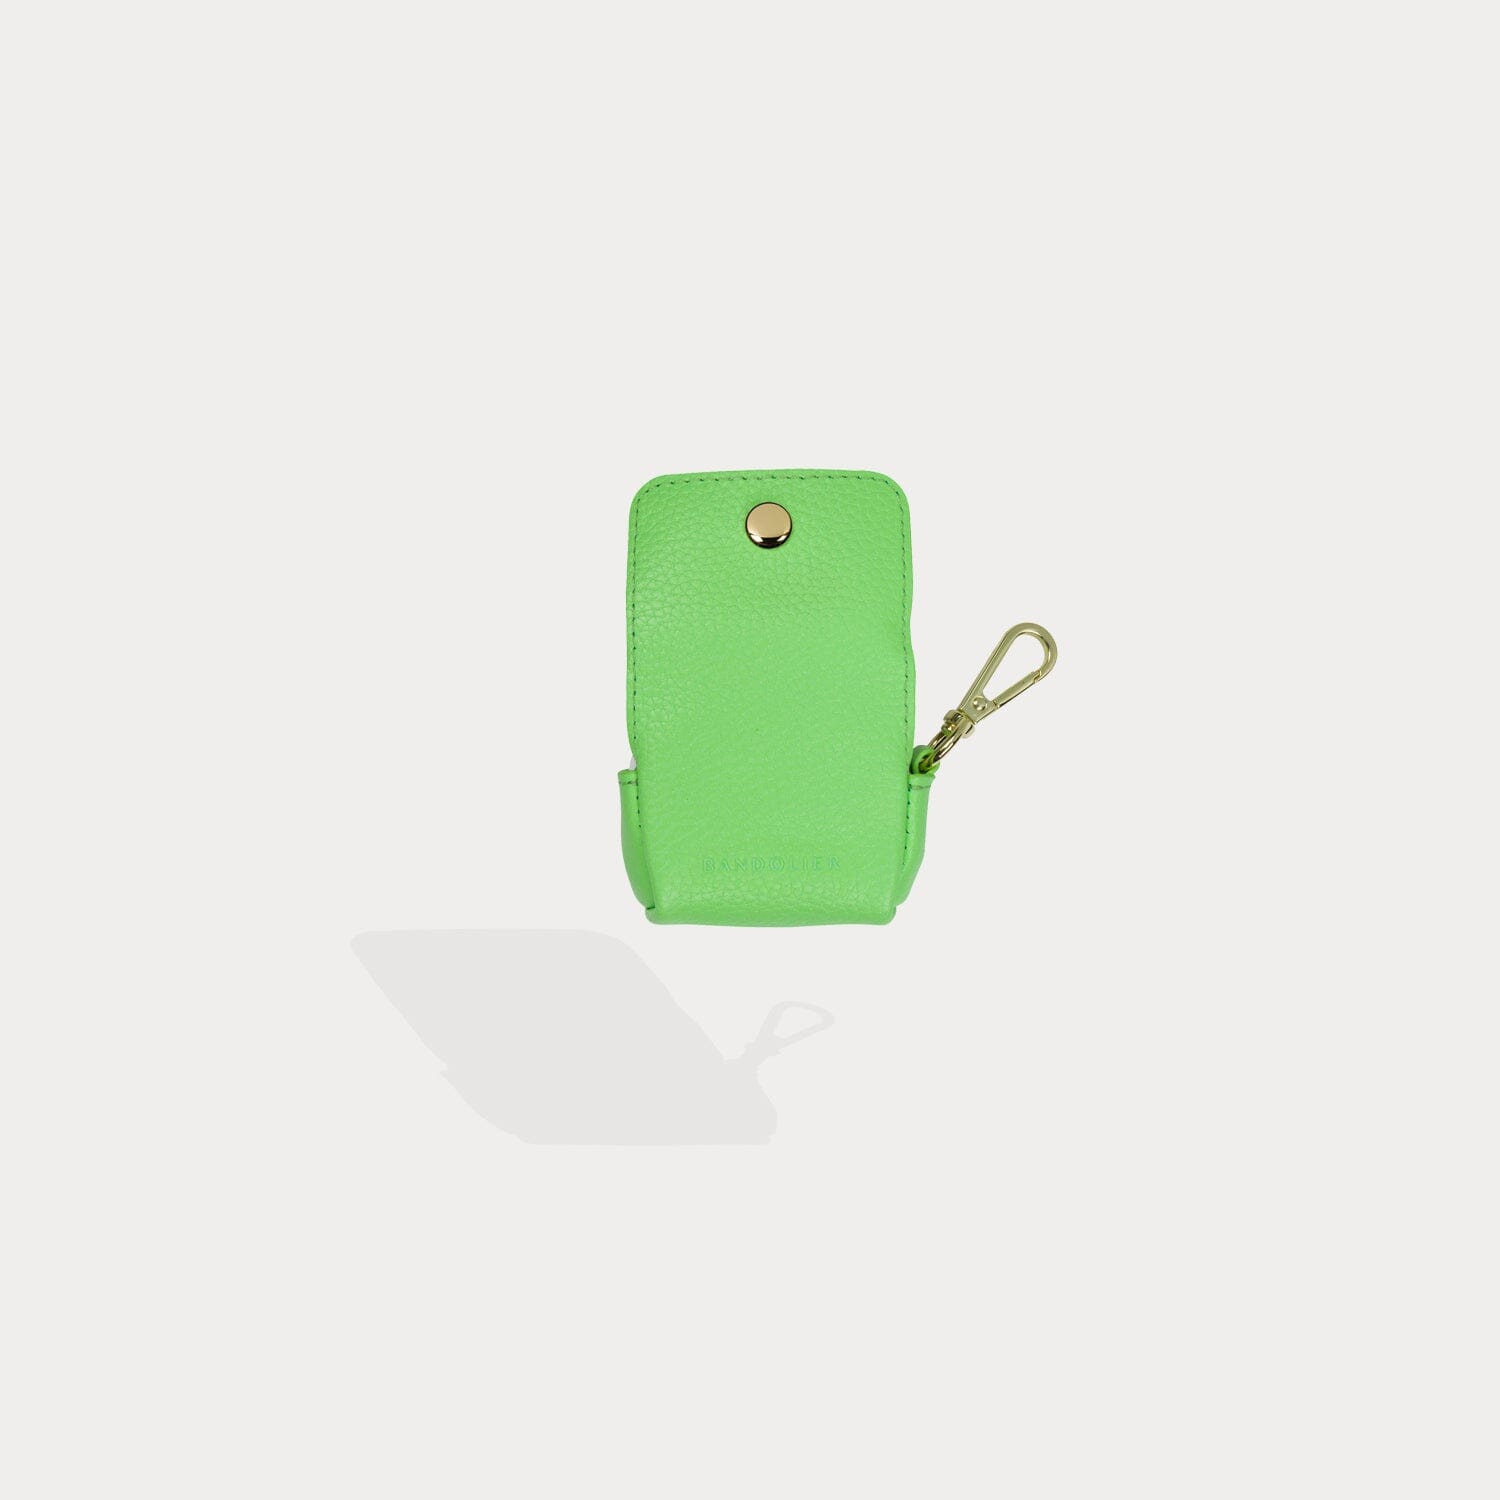 Avery AirPod Clip-On Pouch - Neon Green/Gold Pouch Core Bandolier 